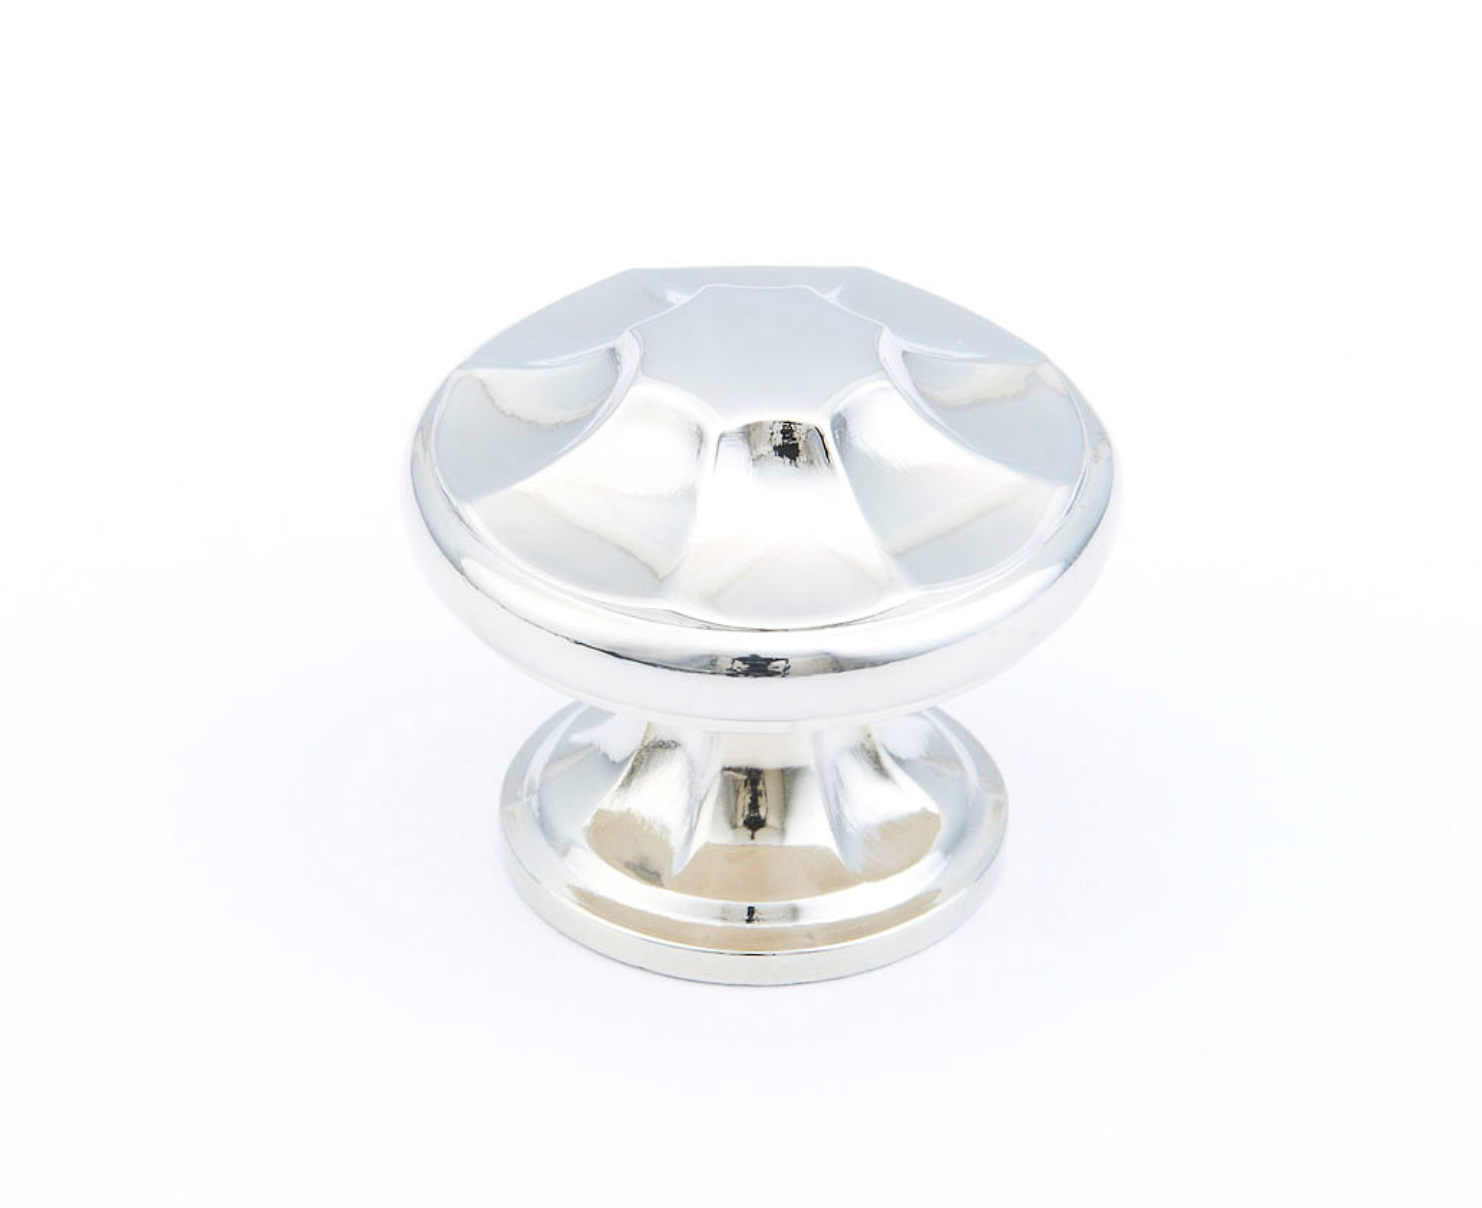 Polished Nickel "Regal" Cabinet Knobs and Drawer Pulls